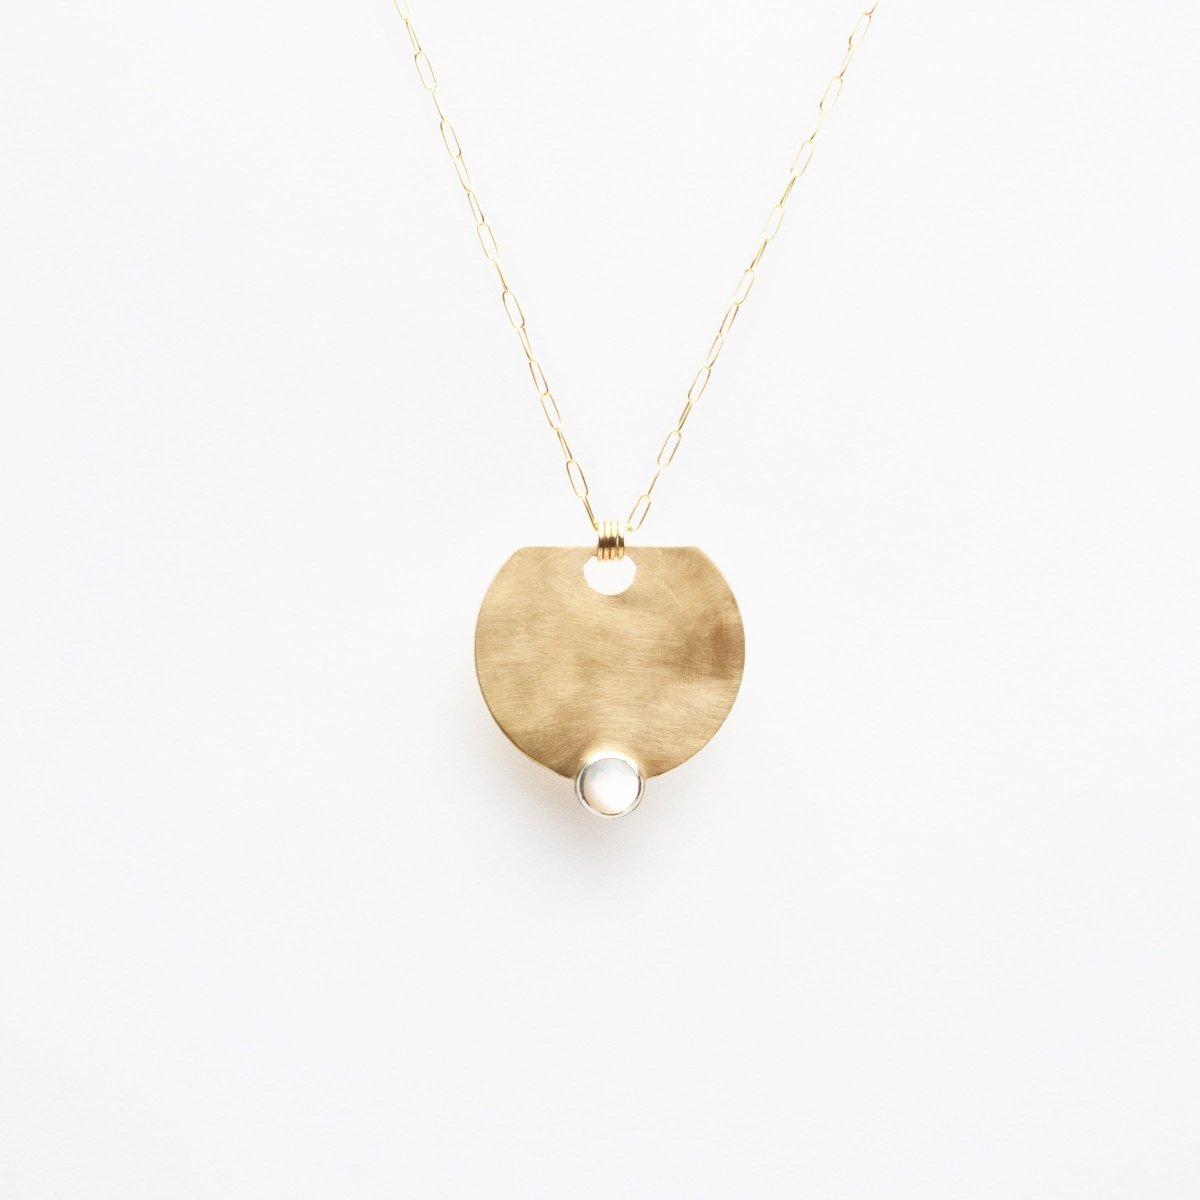 Rounded brass pendant necklace with a Mother of Pearl gemstone set at the bottom. Necklace hangs on a 14k gold filled chain. Designed by Kari Phillips in Portland, Oregon.